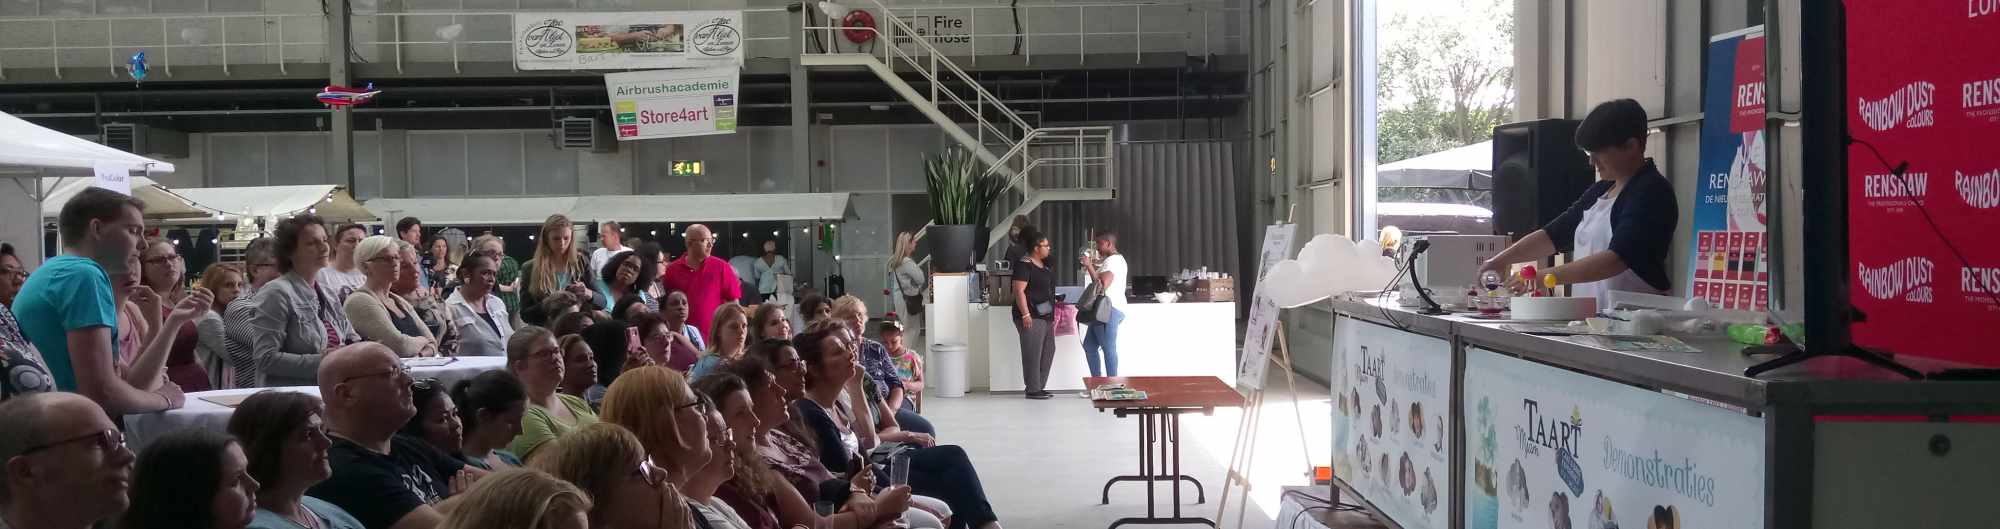 Lindy Smith demonstrating live on stage at MjamTaart cake and bake experience in The Hague, Holland